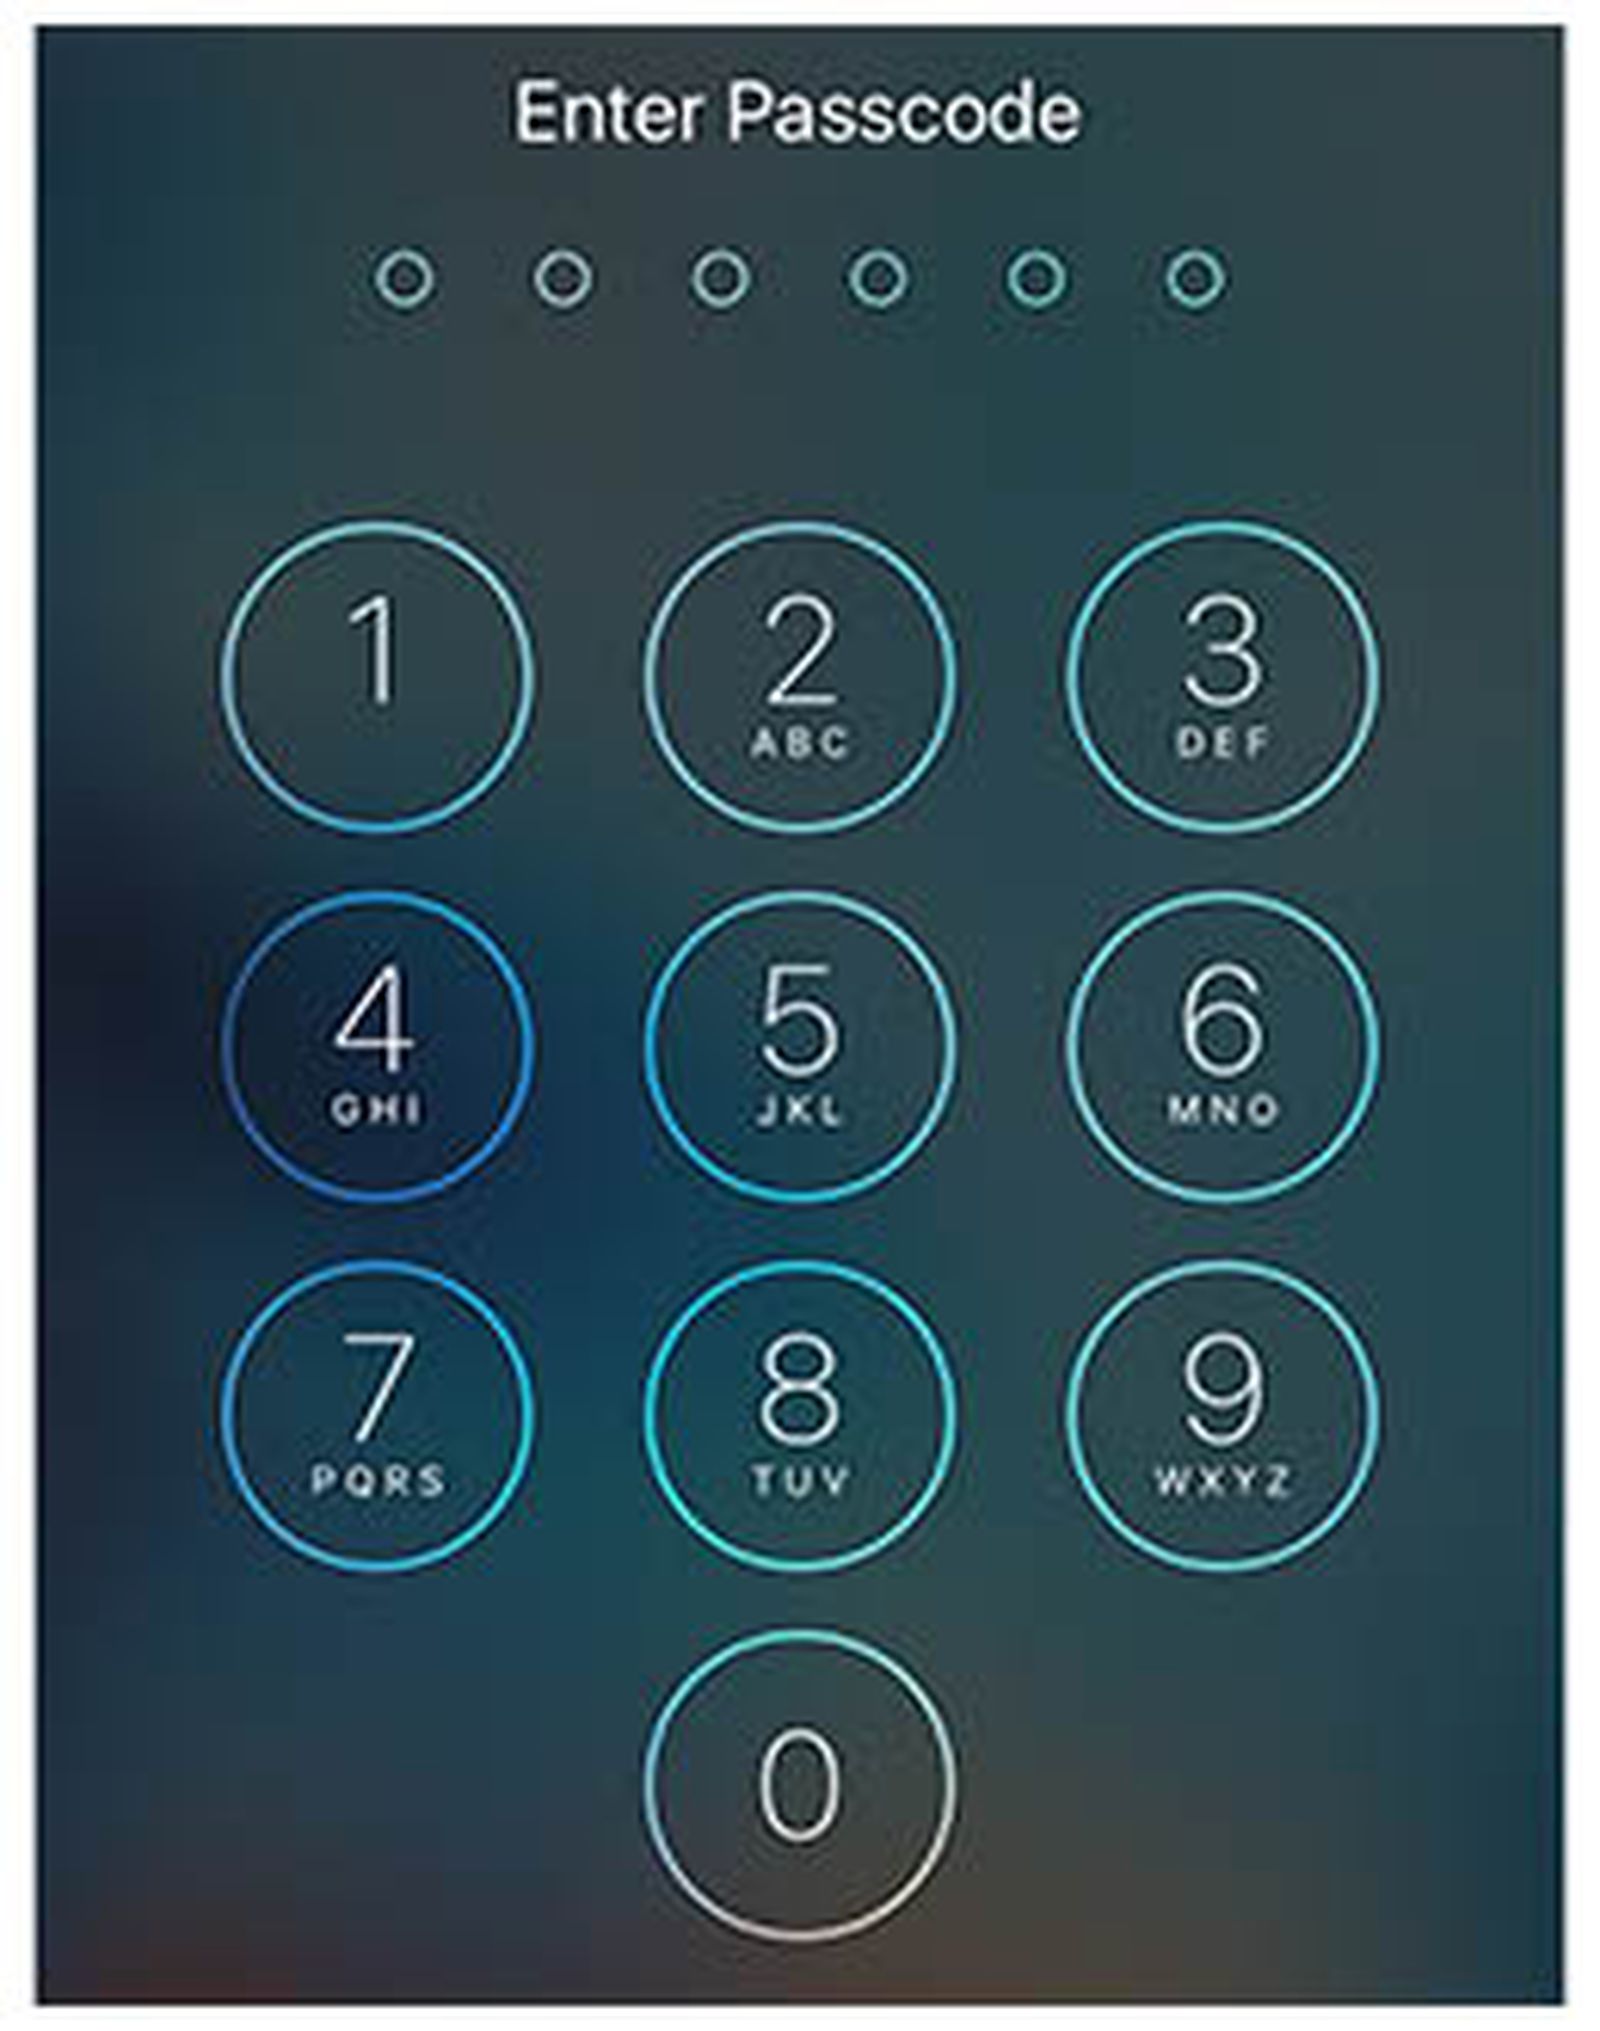 Viral Video Claiming iPhone Passcode 'Glitch' is False - MacRumors